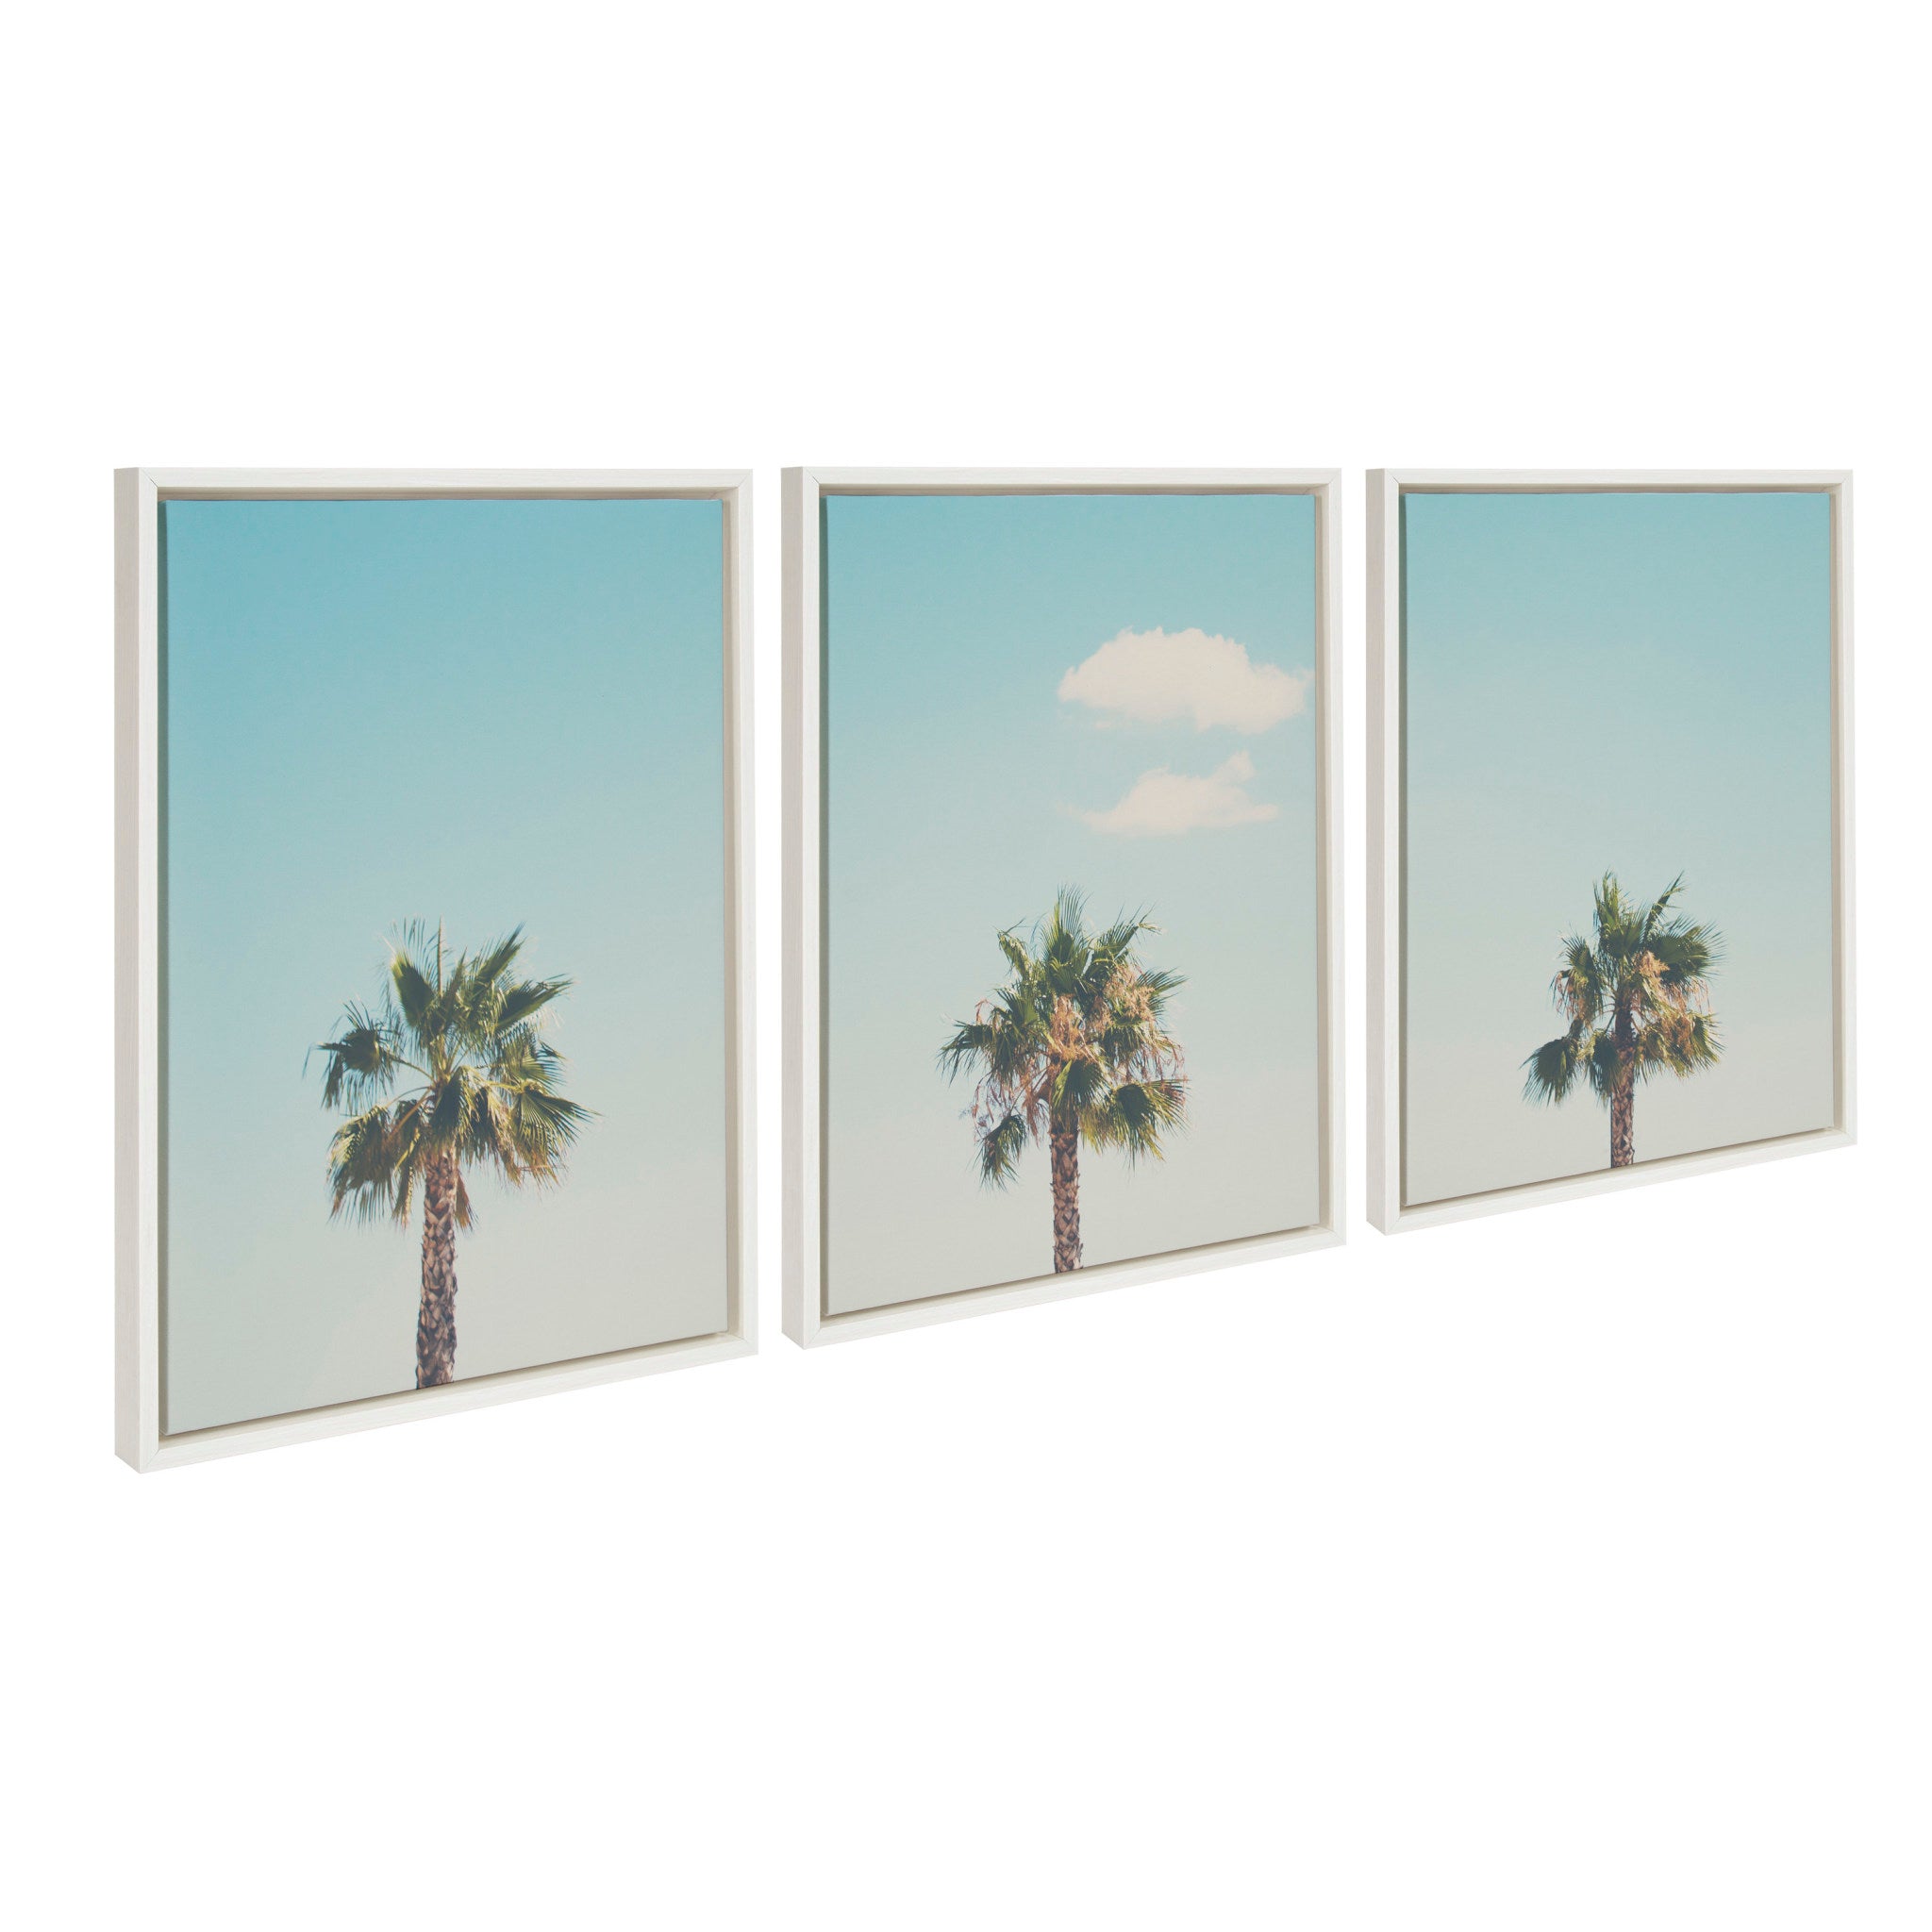 Sylvie Trio of Palm Trees 1, 2 and 3 Framed Canvas by Laura Evans